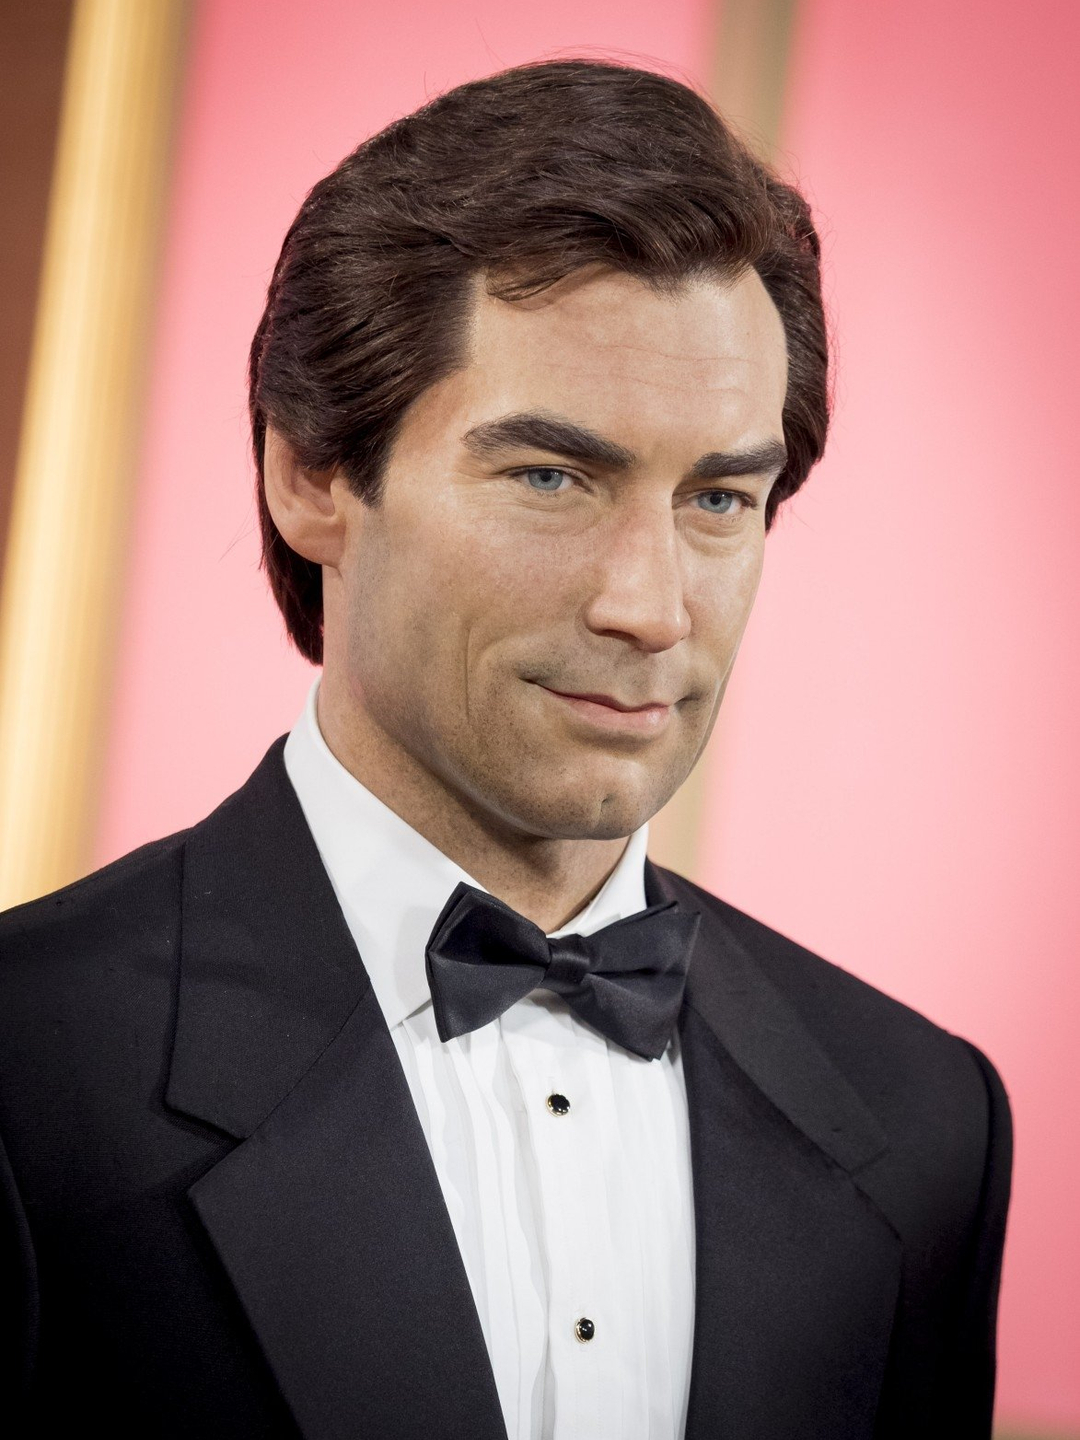 Timothy Dalton who is his father